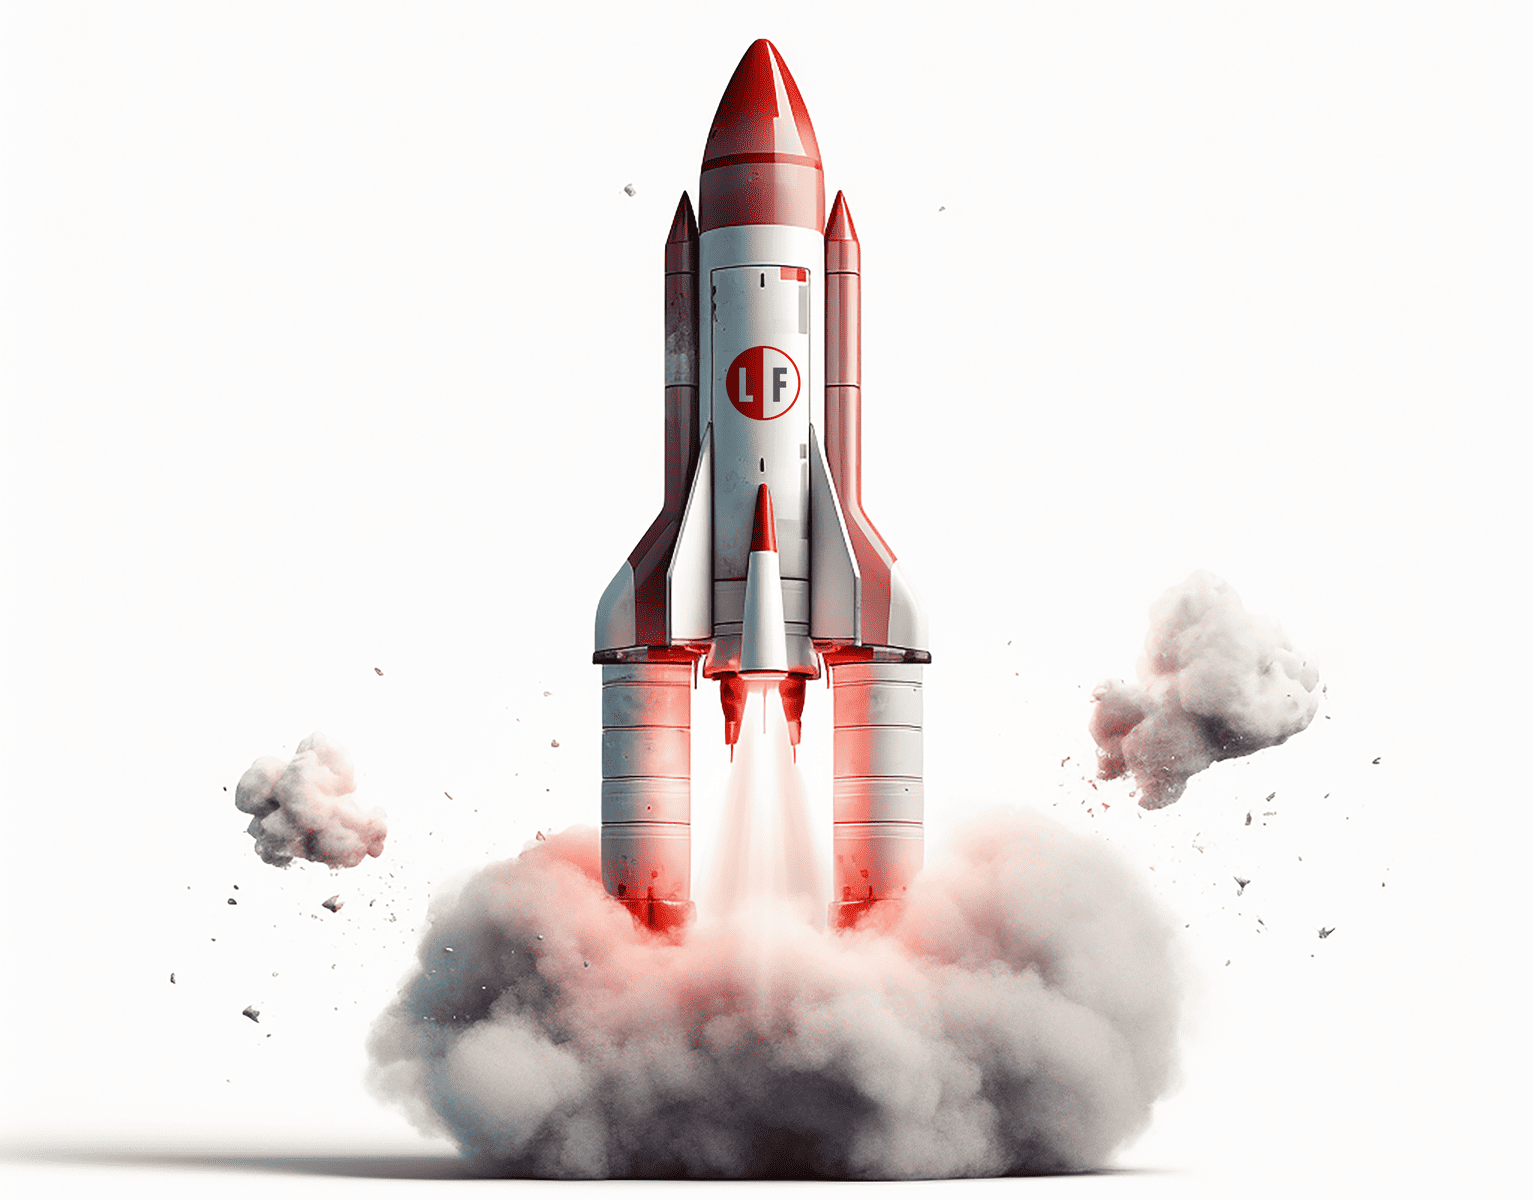 Lead_Forensics_a_grey_and_red_rocket_going_up_on_a_white_background